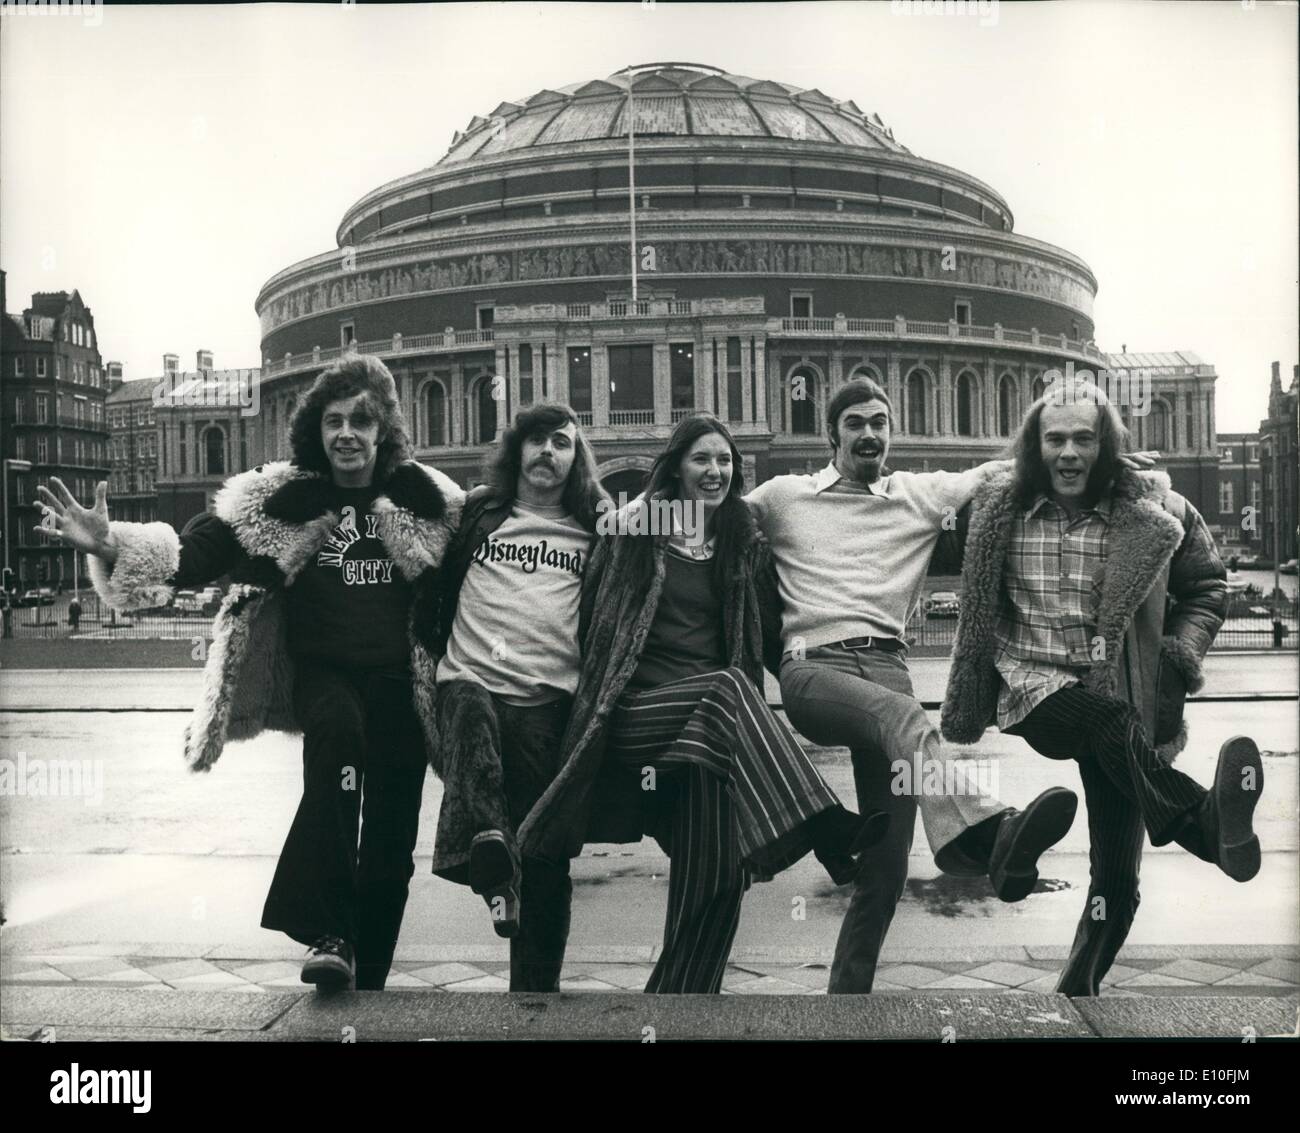 Jan. 01, 1973 - Steeleye Span Group To Give Albert Hall Concert: The British folk group Steeleye Span, just returned from a successful American tour - are to give a concert tonight at the Royal Albert Hall - the last in the ''Fanfare for Europe'' series. Photo shows The Steeleye Span folk group outside the Albert Hall today. (L to R) : Bob Johnson; Tim Hart; Maddy Prior; Peter Knight and Rick Kemp. Stock Photo